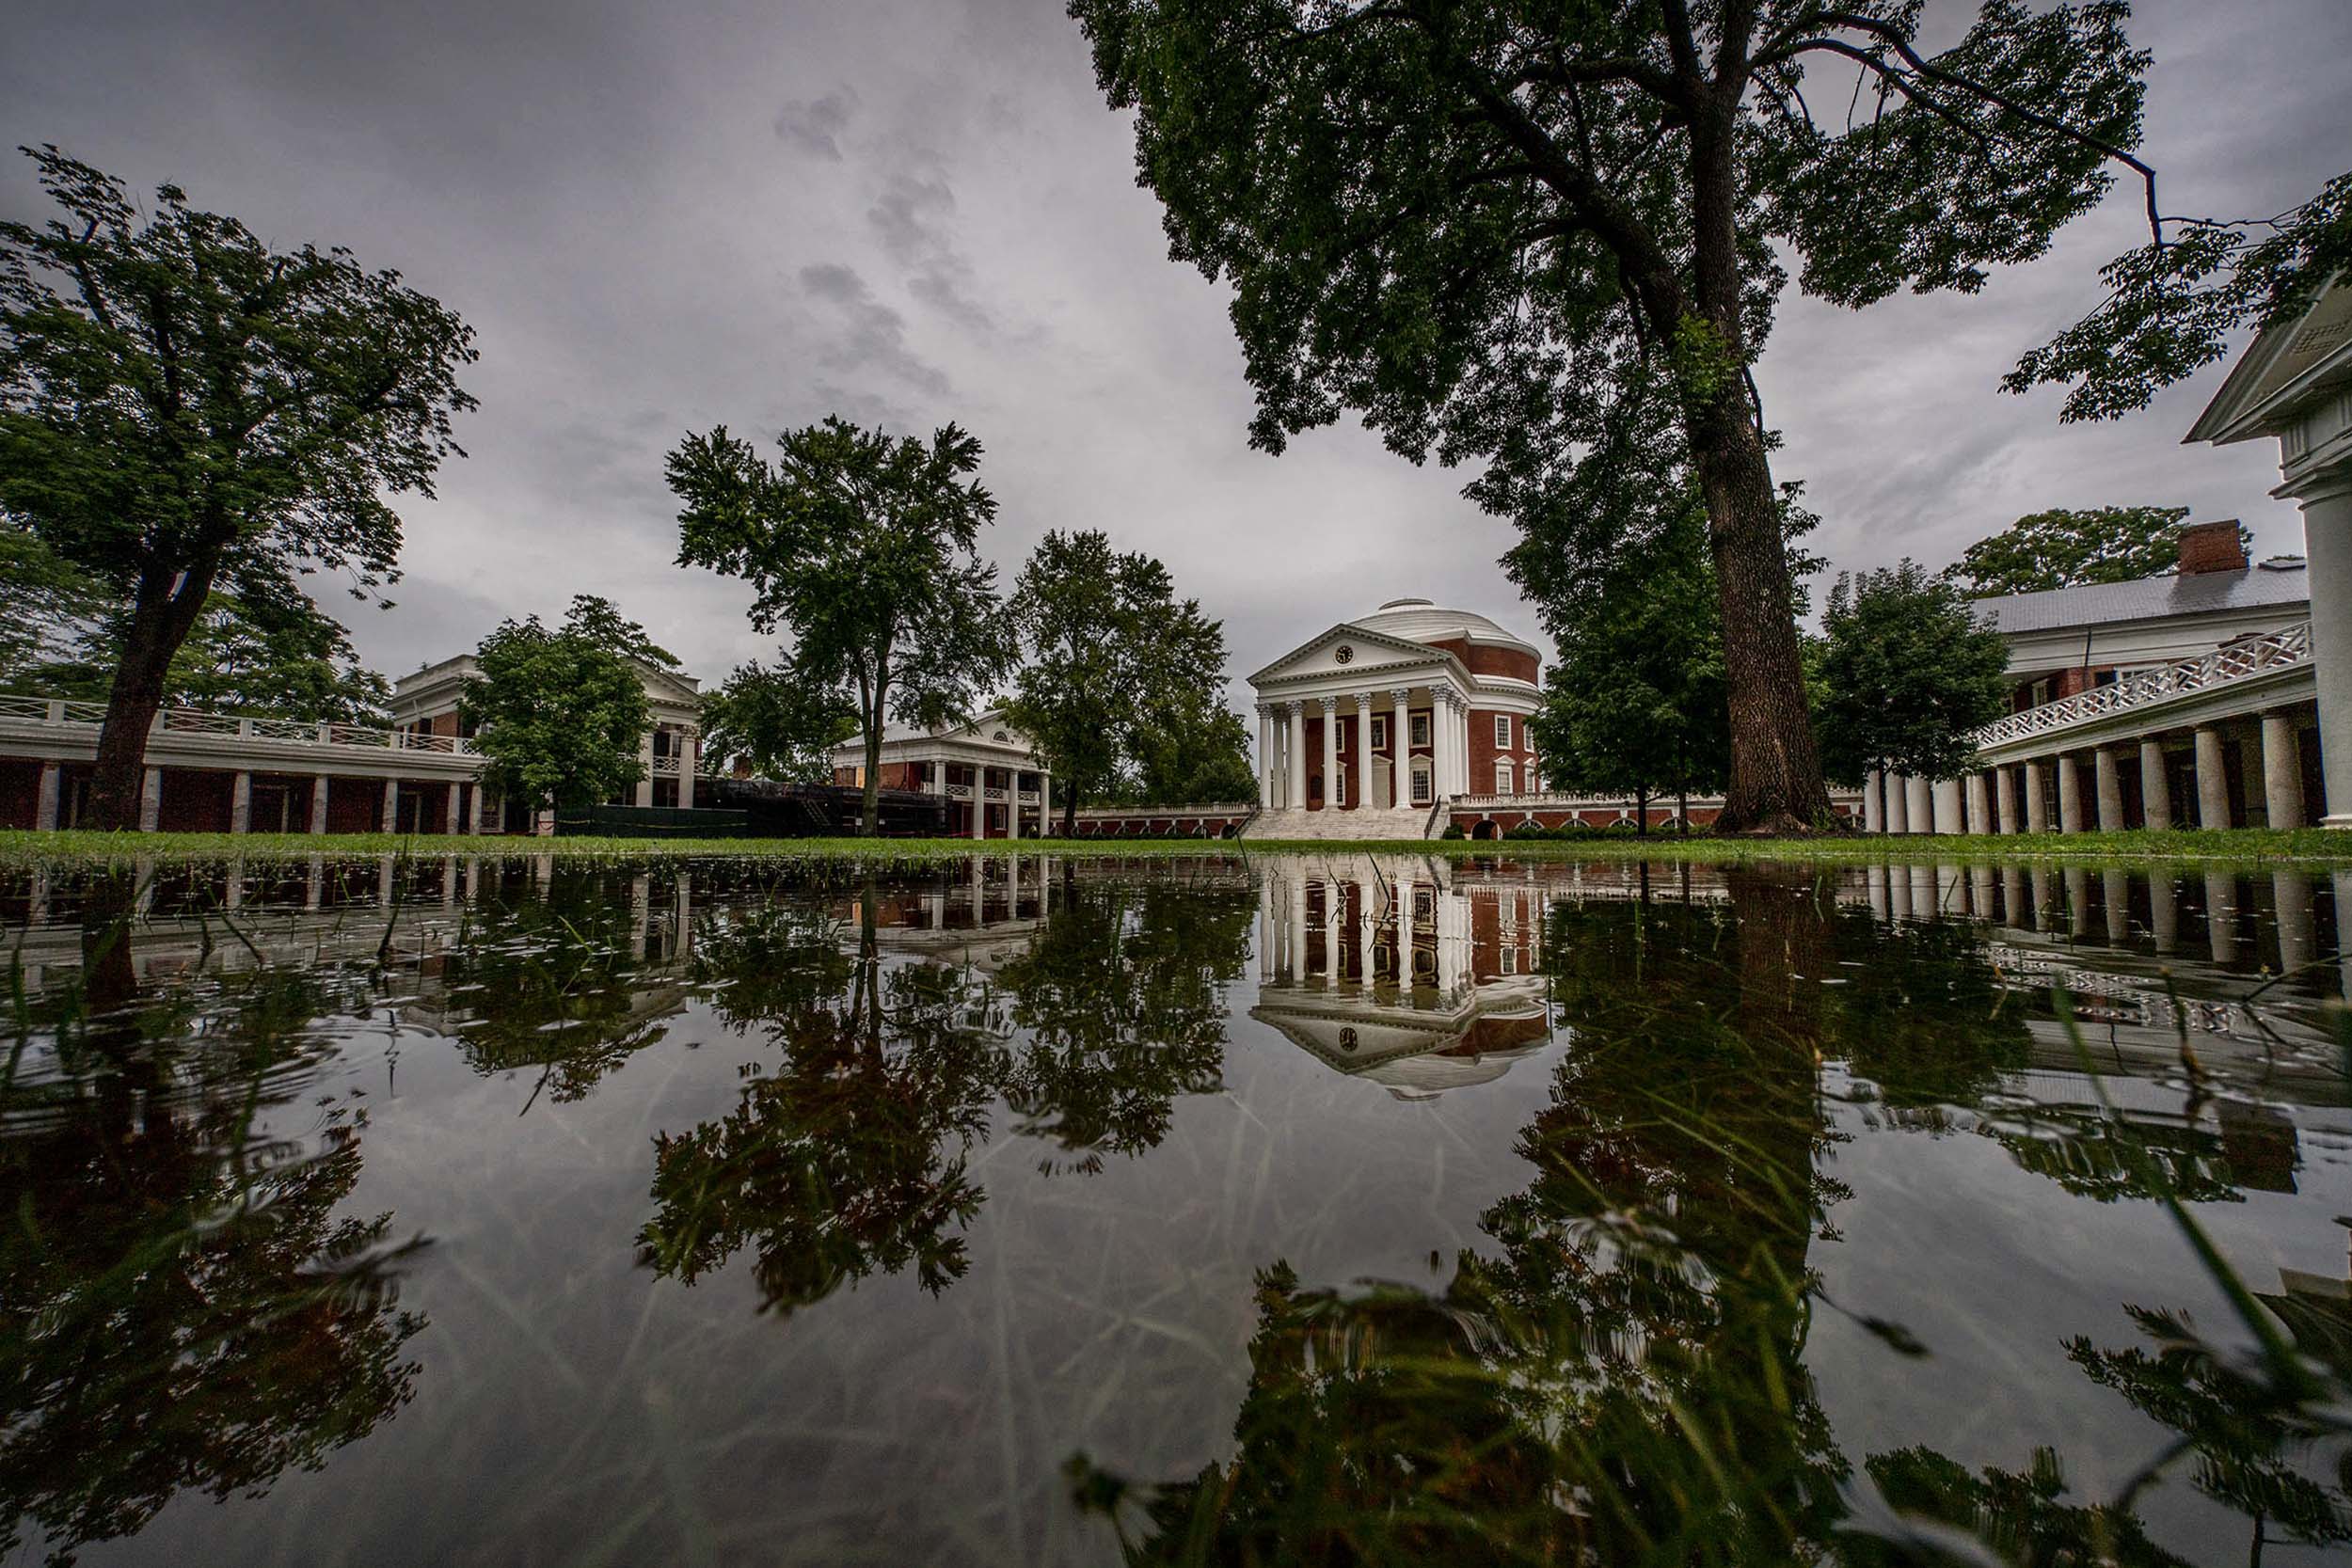 The flooded Lawn reflecting the trees and Rotunda on the water